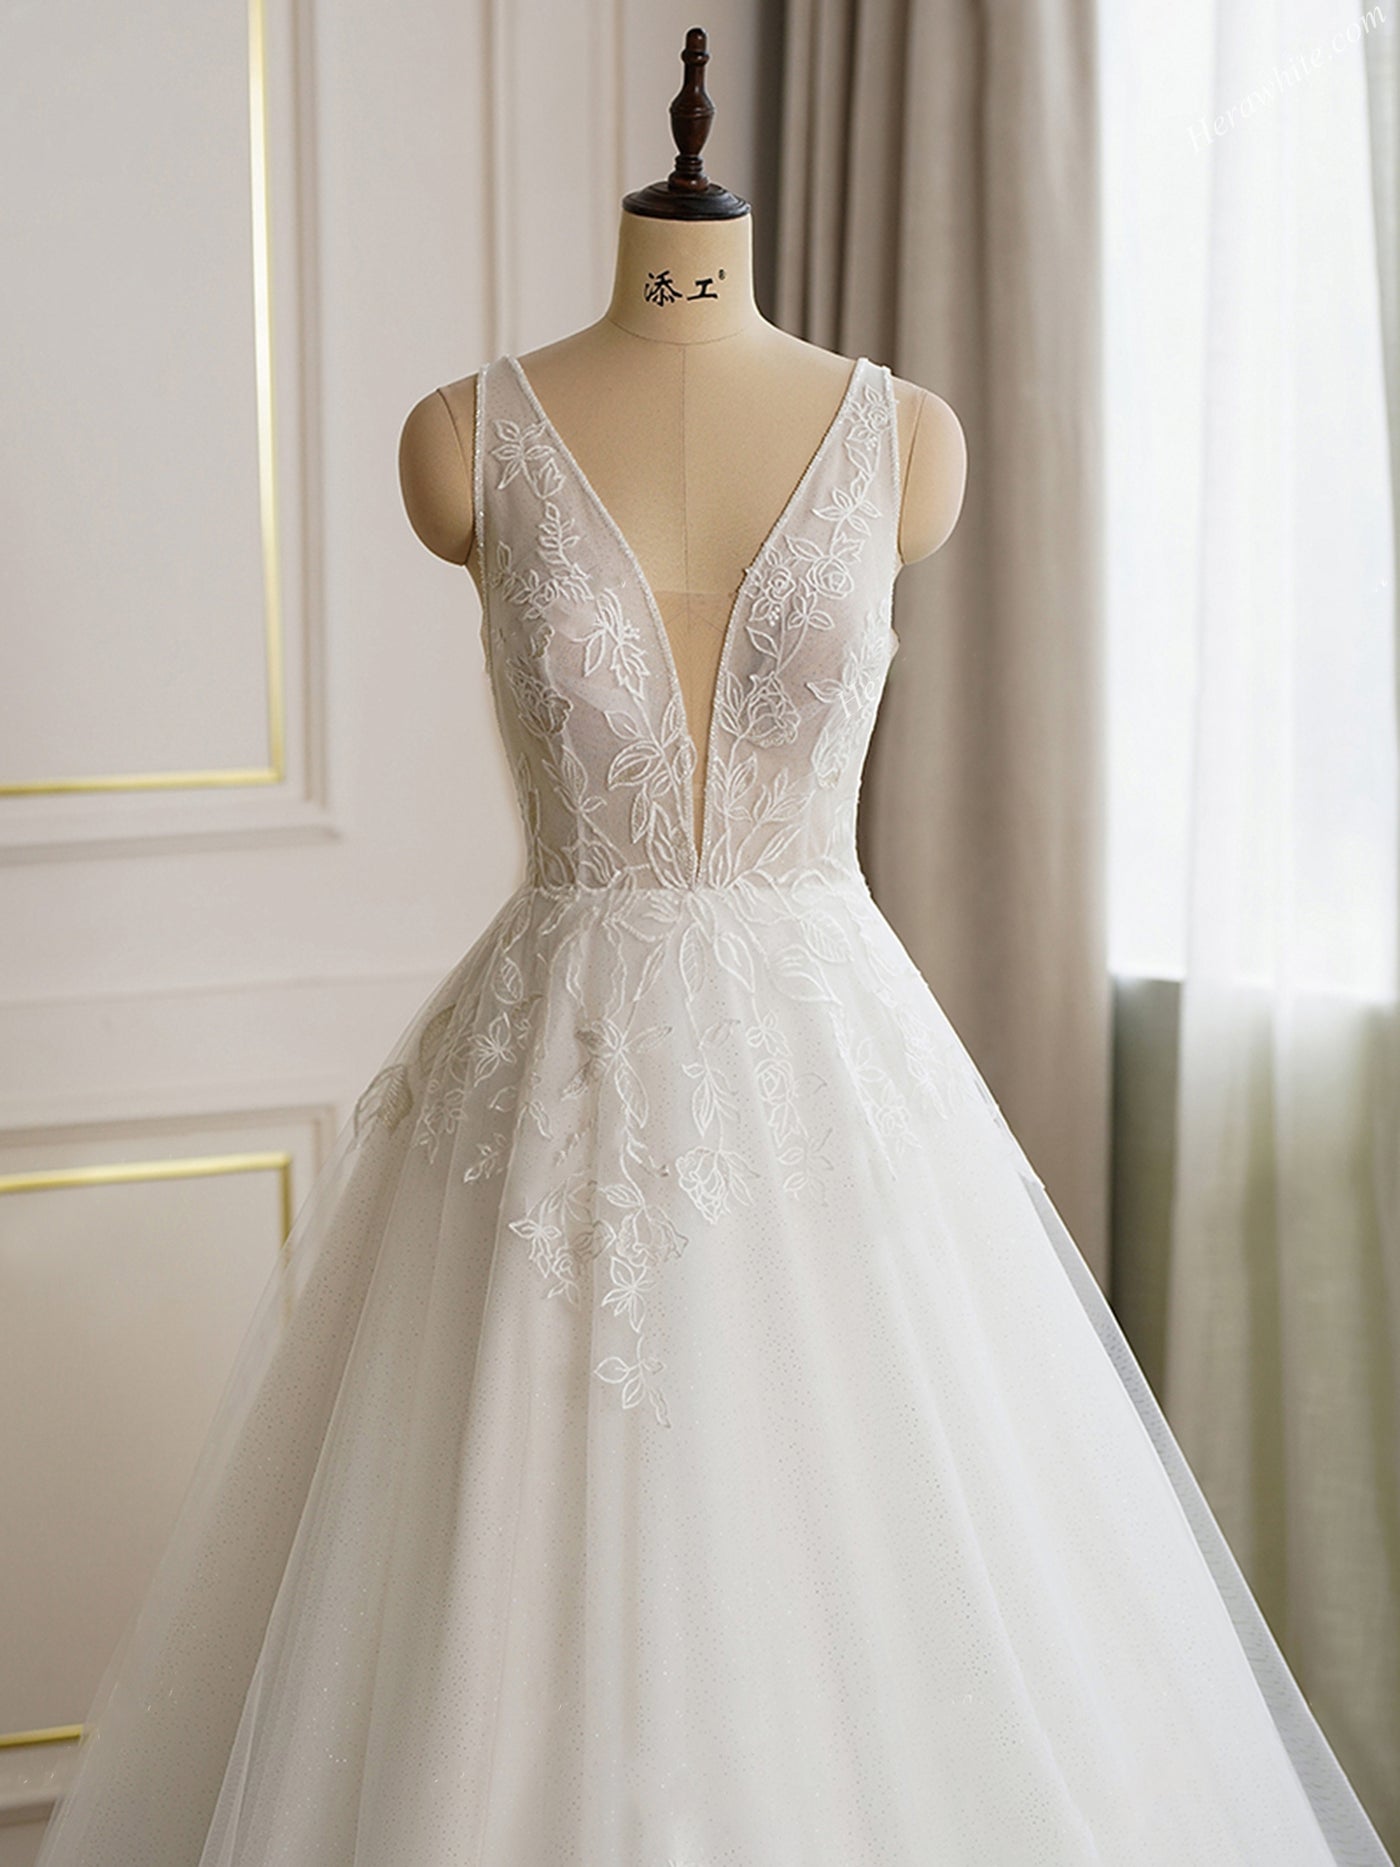 Plunging V Neckline Lace Ball Gown Bridal Dress